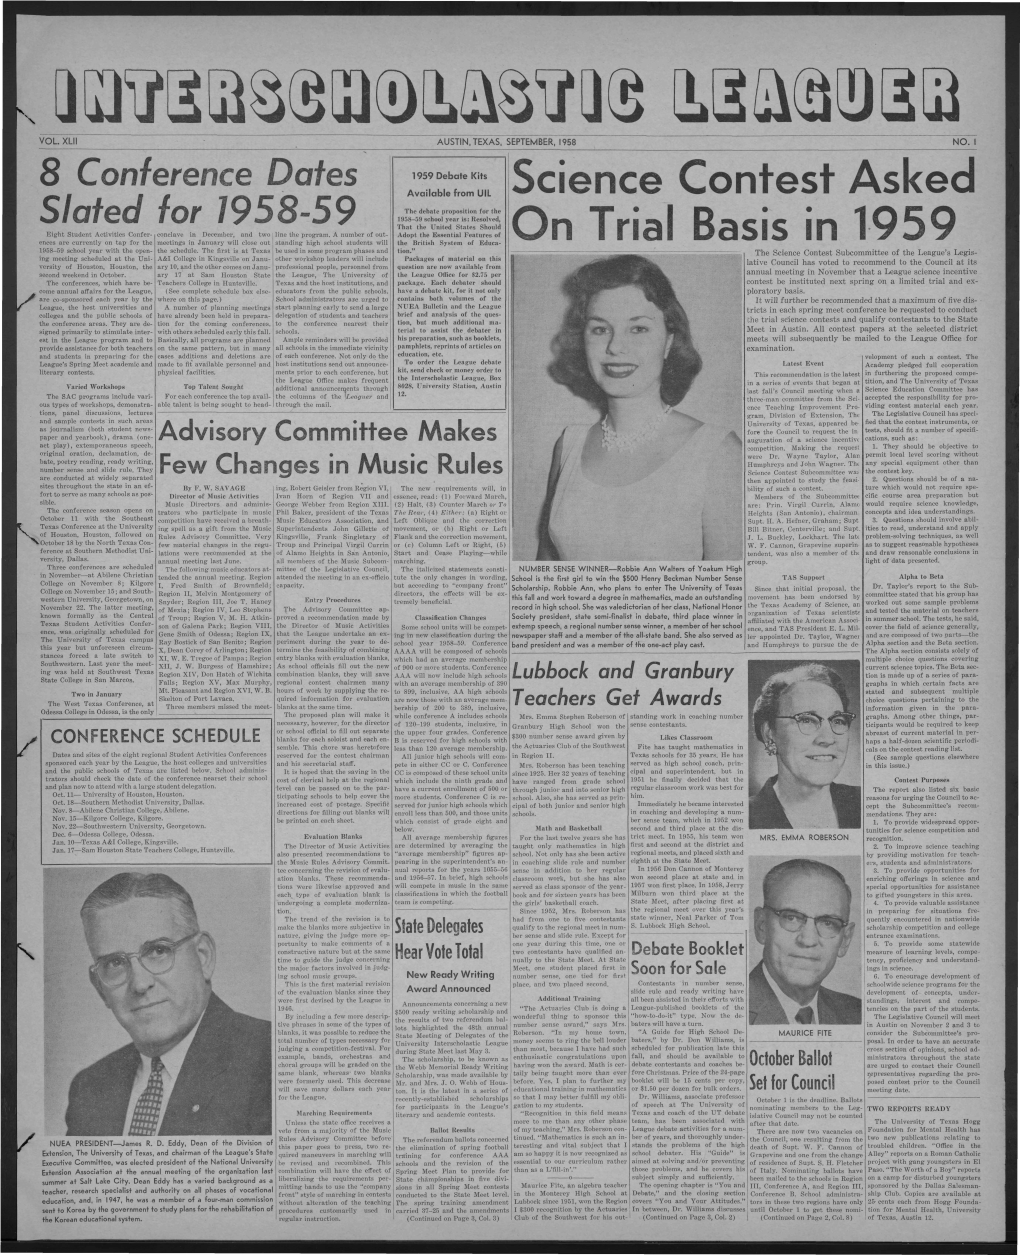 Science Contest Asked on Trial Basis in 1959